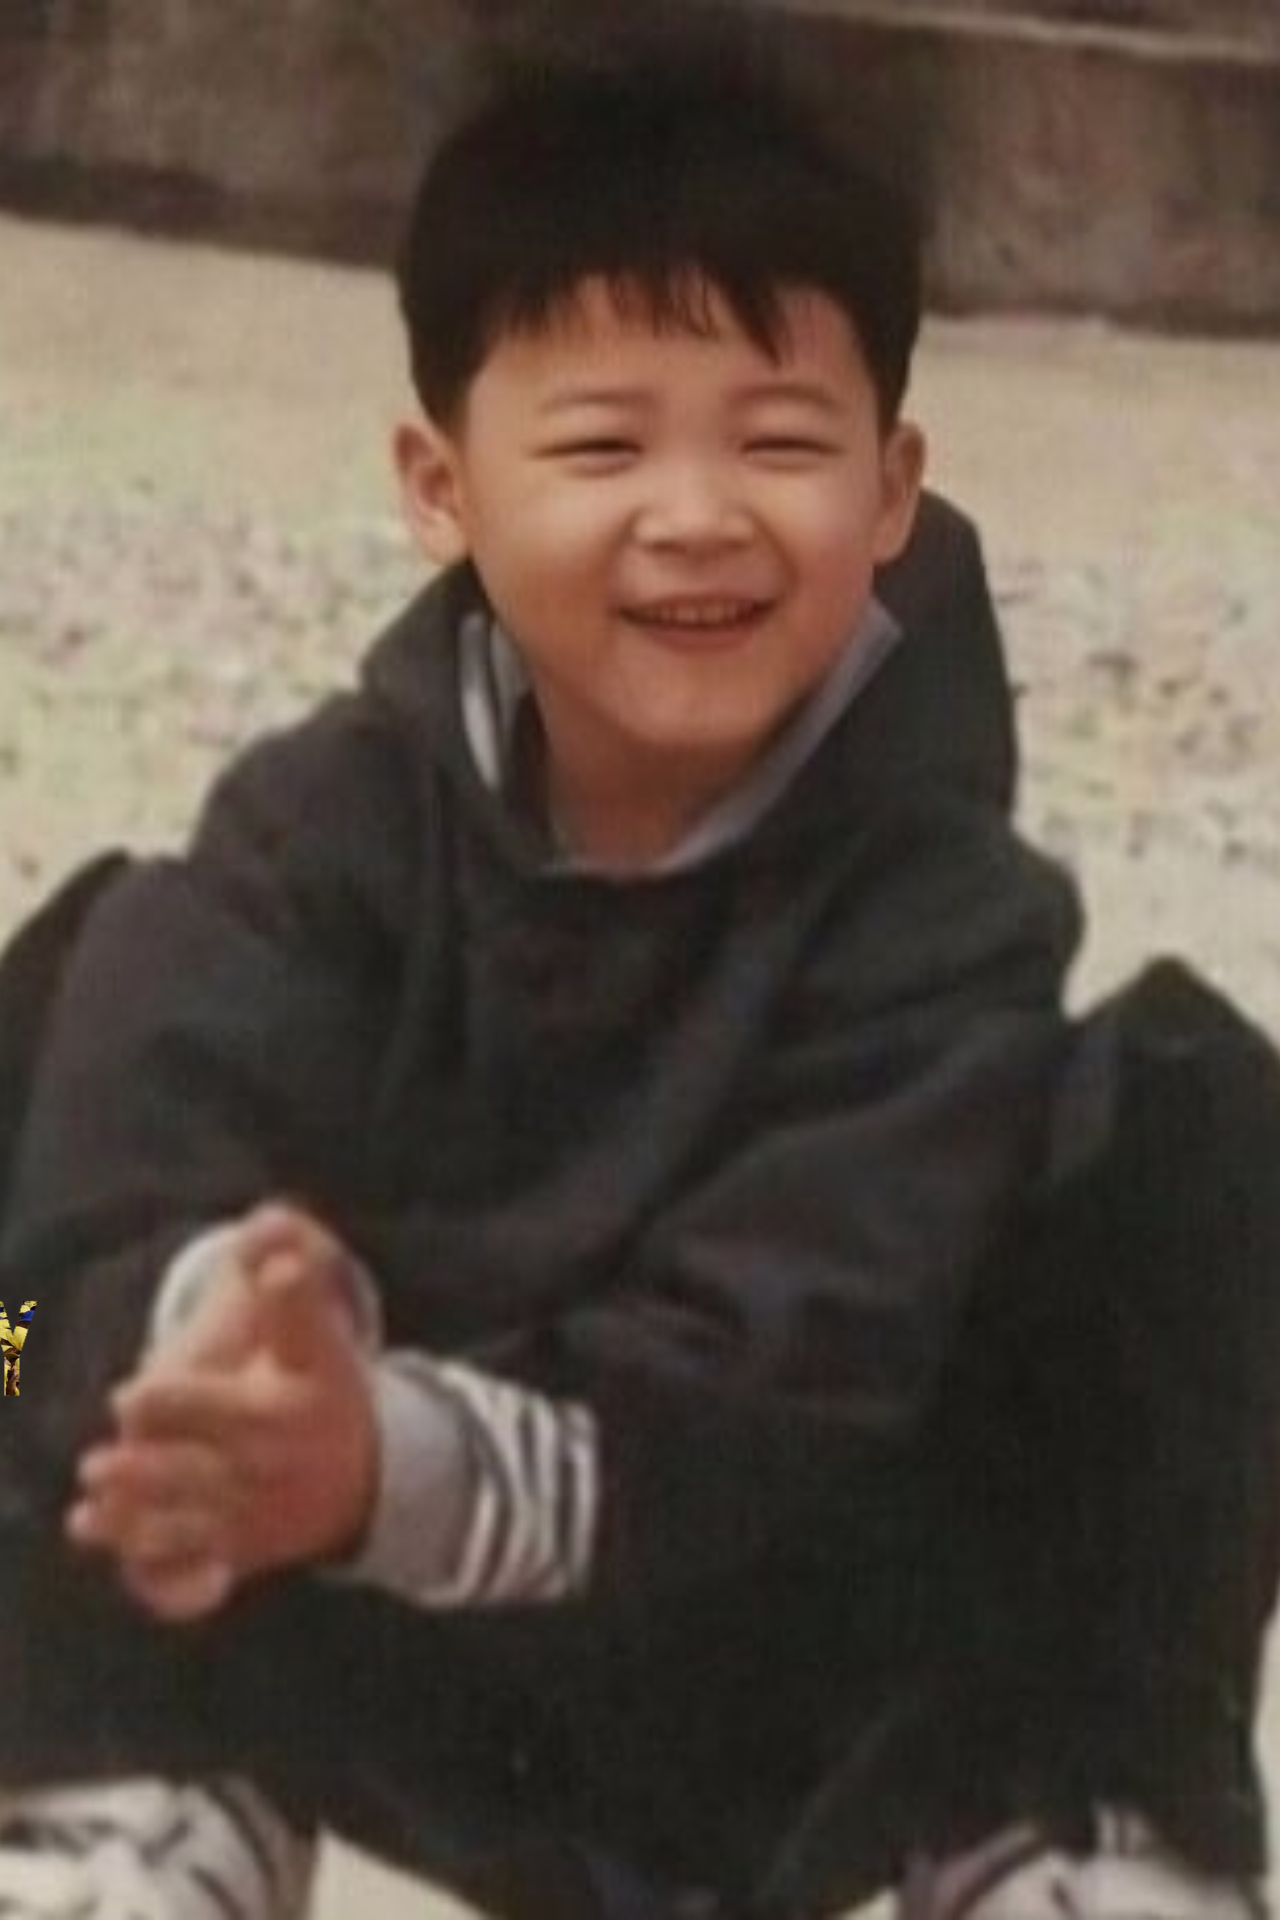 Bts Jimin Childhood Photos That Will Make You Fall In Love With Him Ag